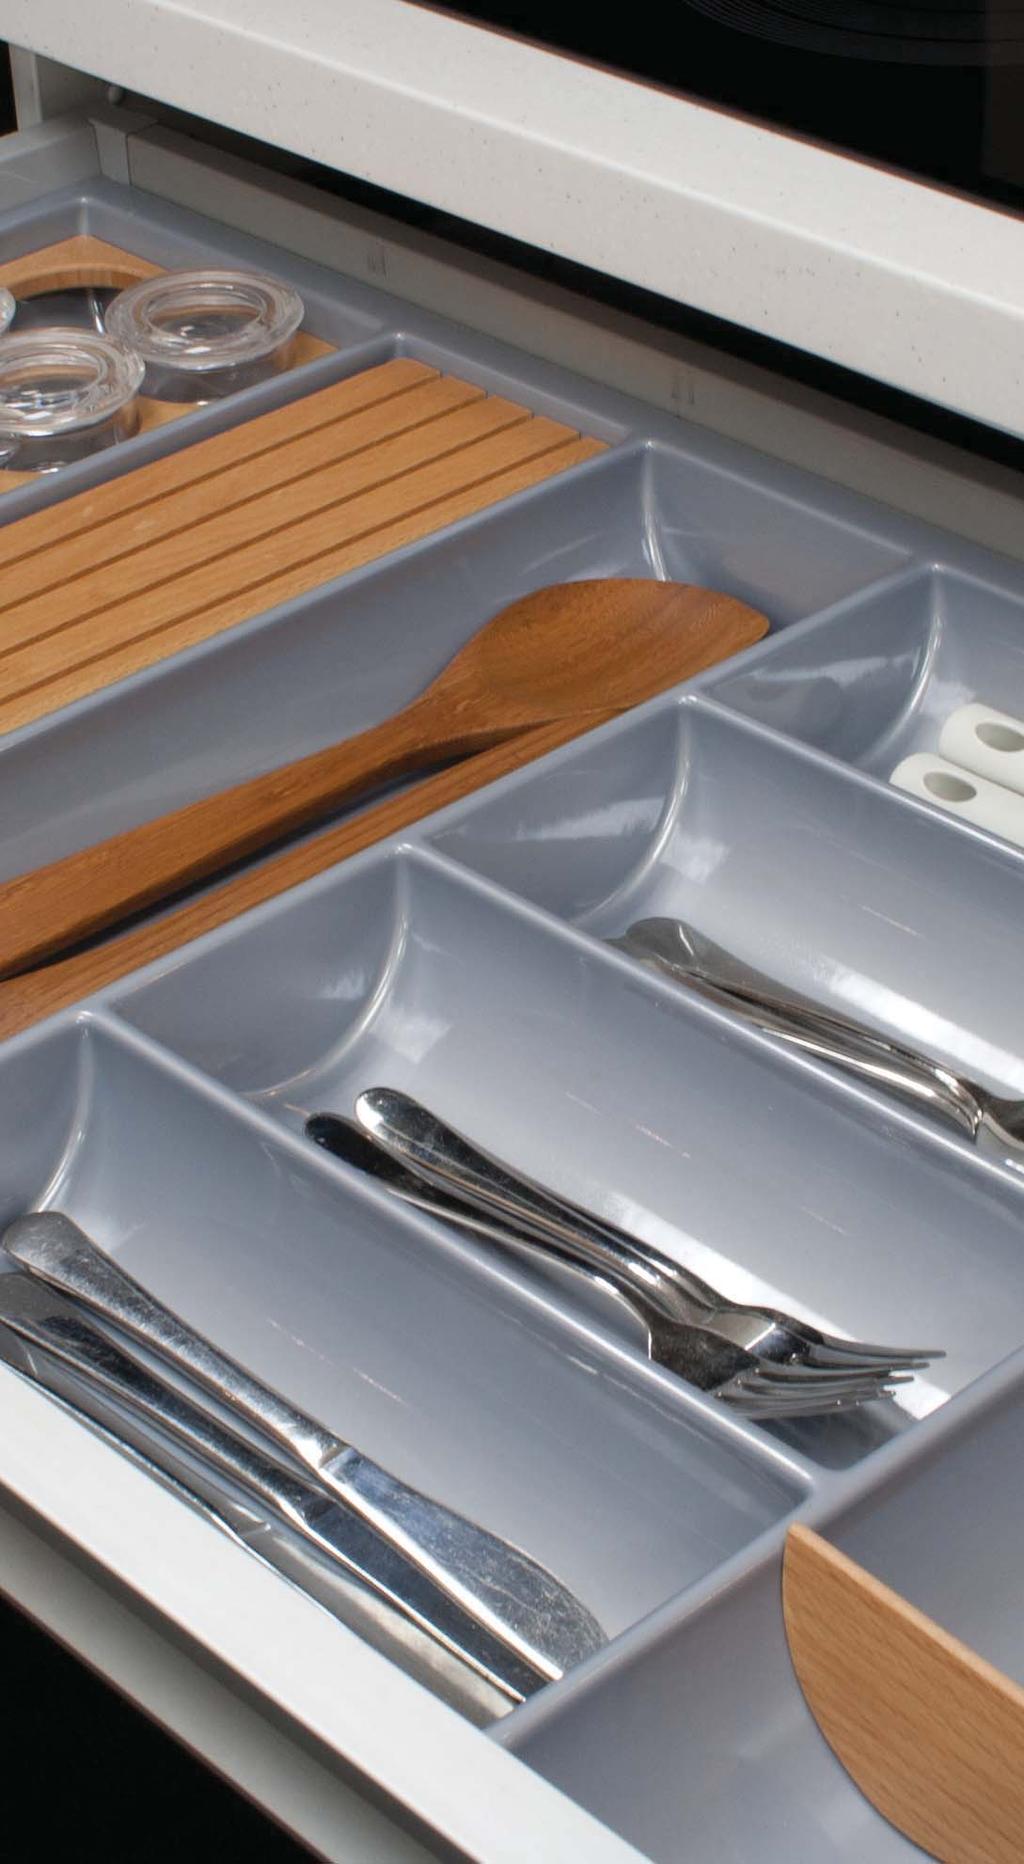 300 mm 400-450 mm 500-550 mm 600 mm CUTLERY TRAY, DEPTH 437-496 MM For cutting to size.